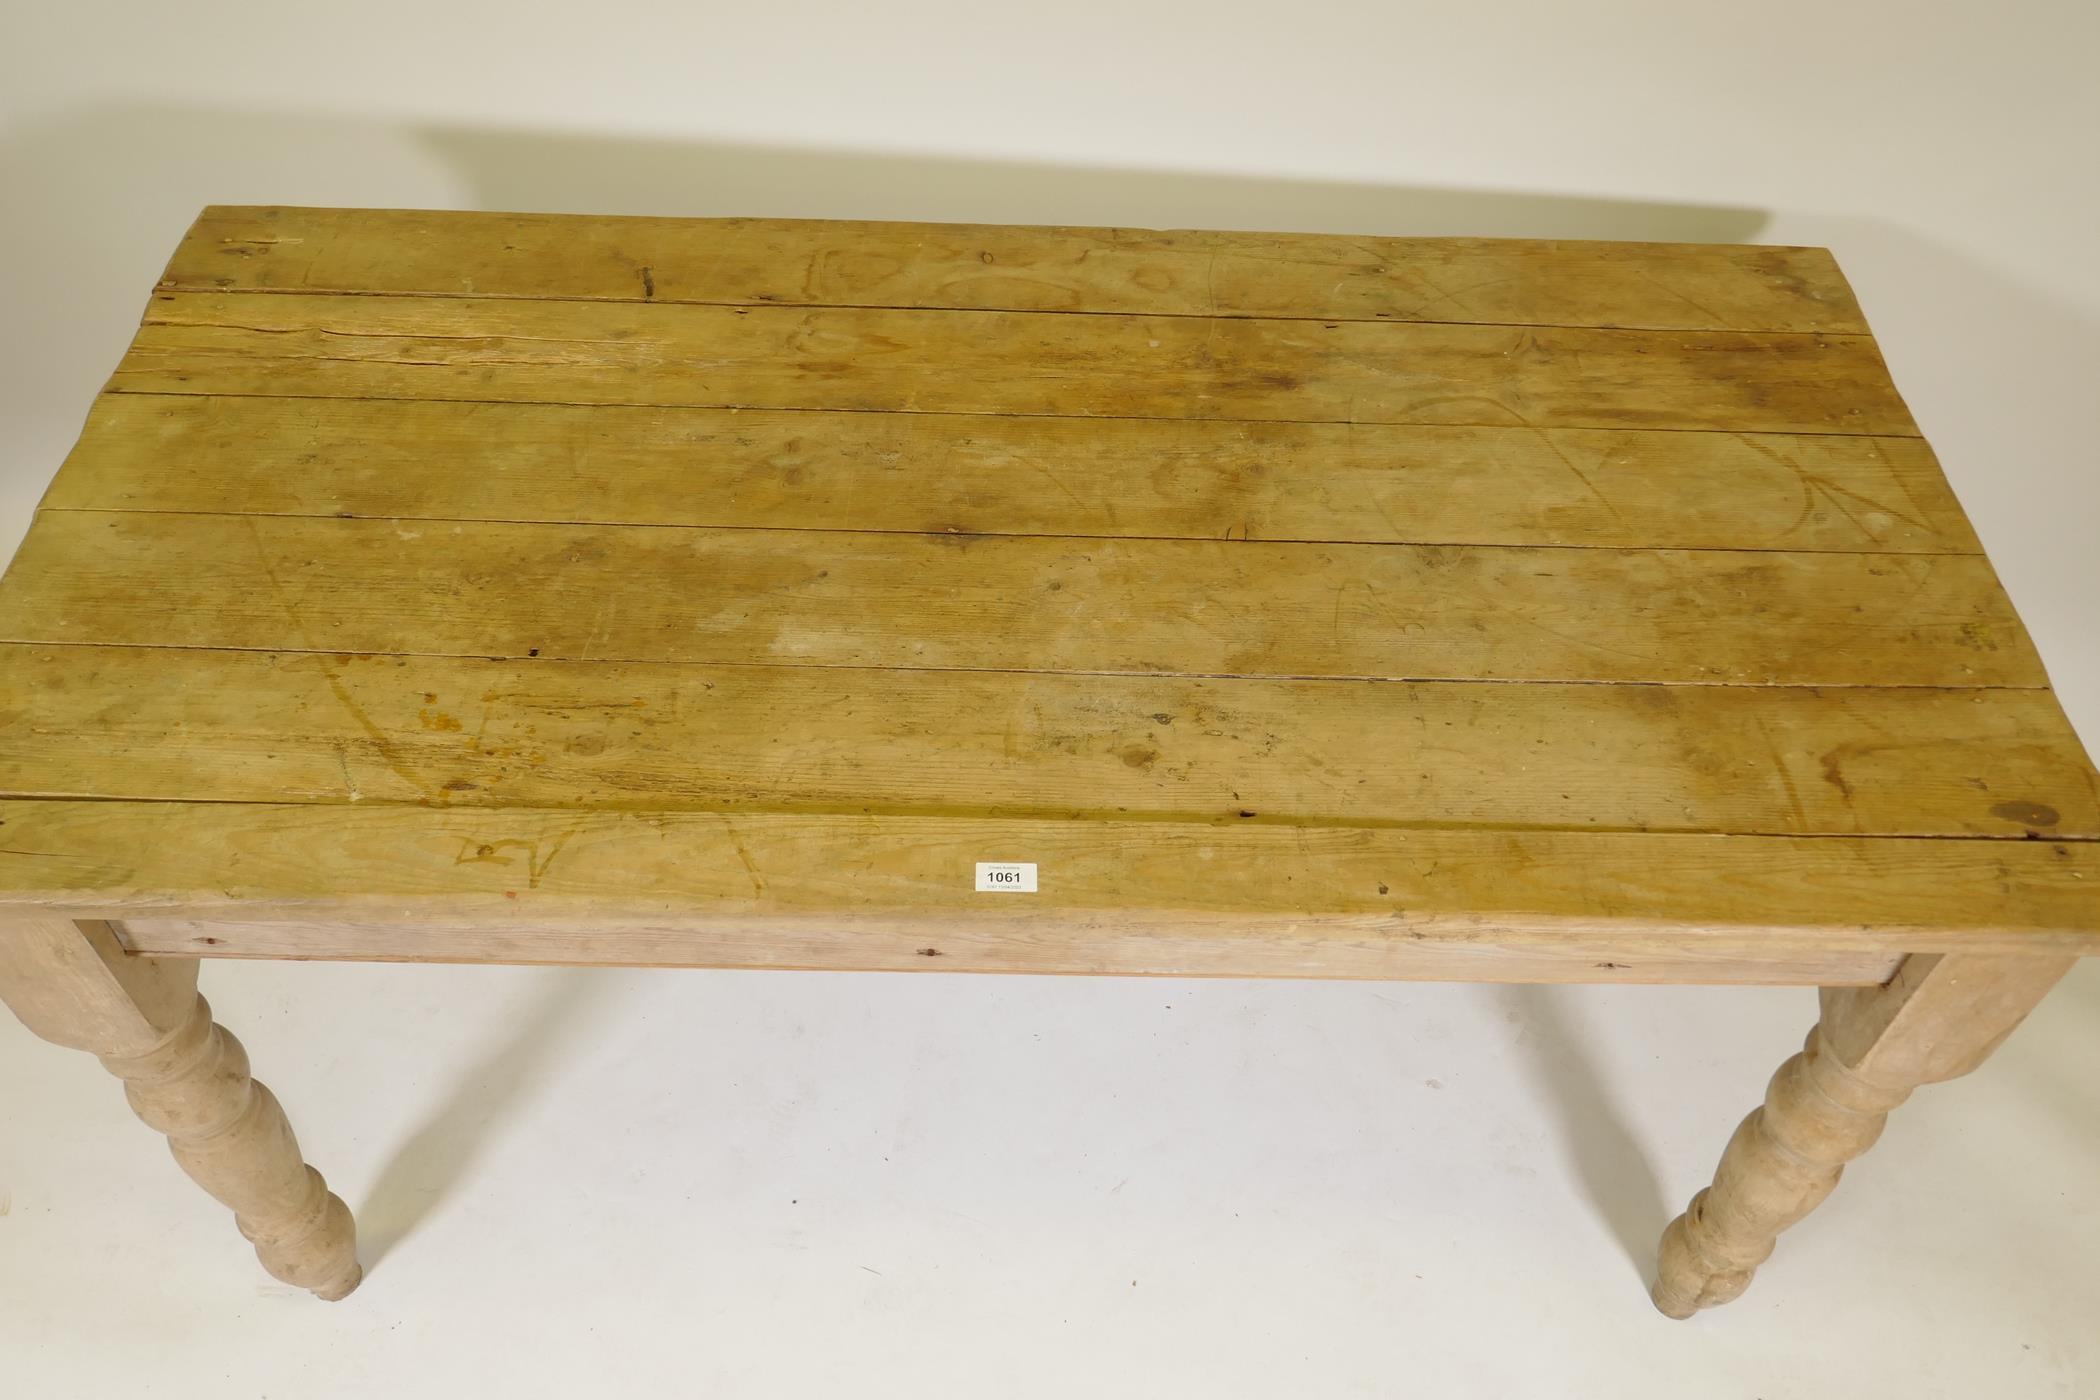 A pine scullery table with planked top, 58" x 30" x 30" - Image 3 of 3